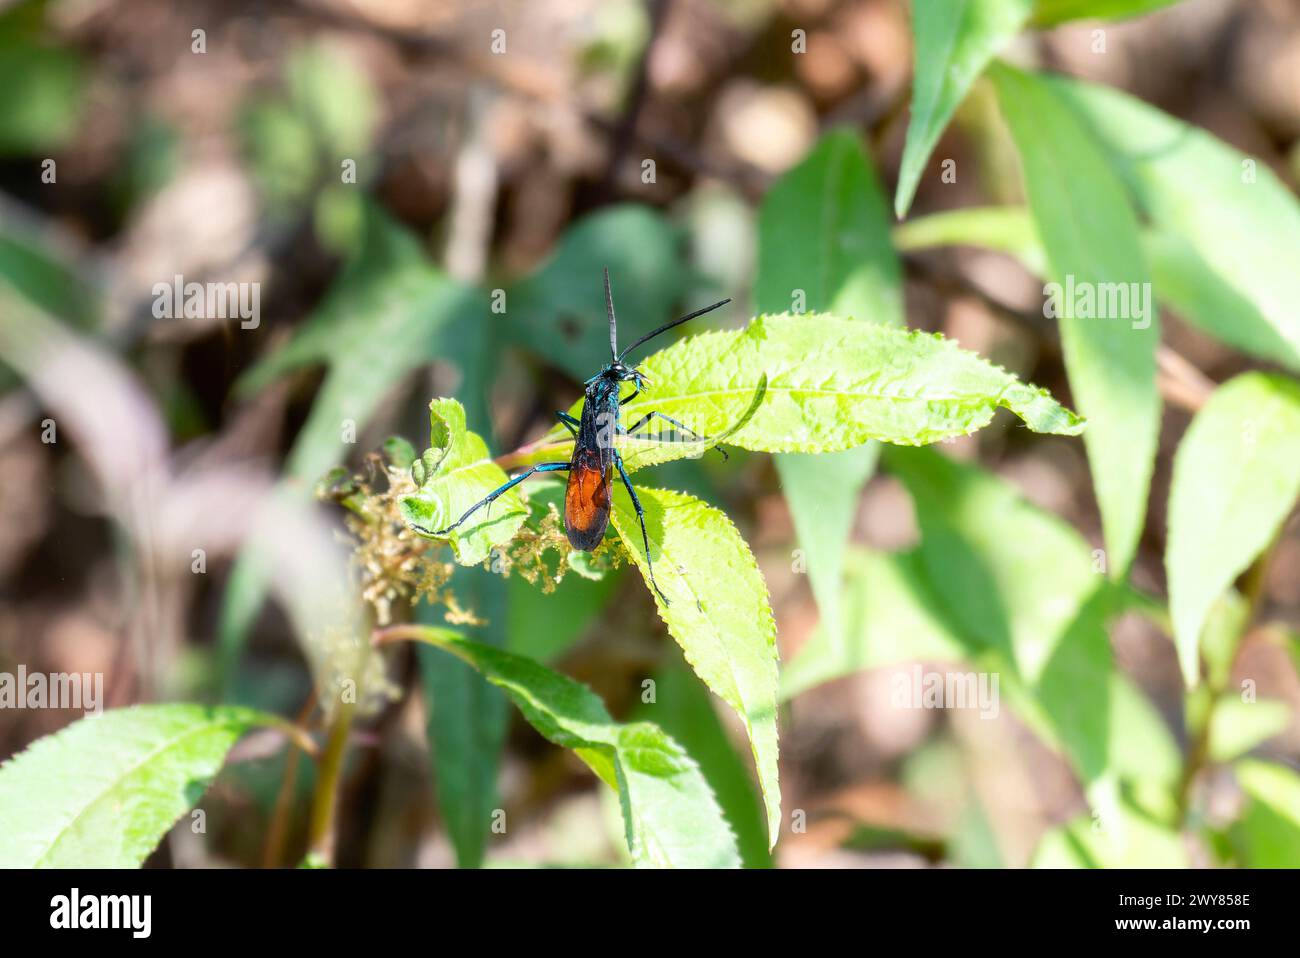 A New World Tarantula-hawk, in the Pepsis, a wasp, on top of a vibrant green leaf in Mexico. Stock Photo